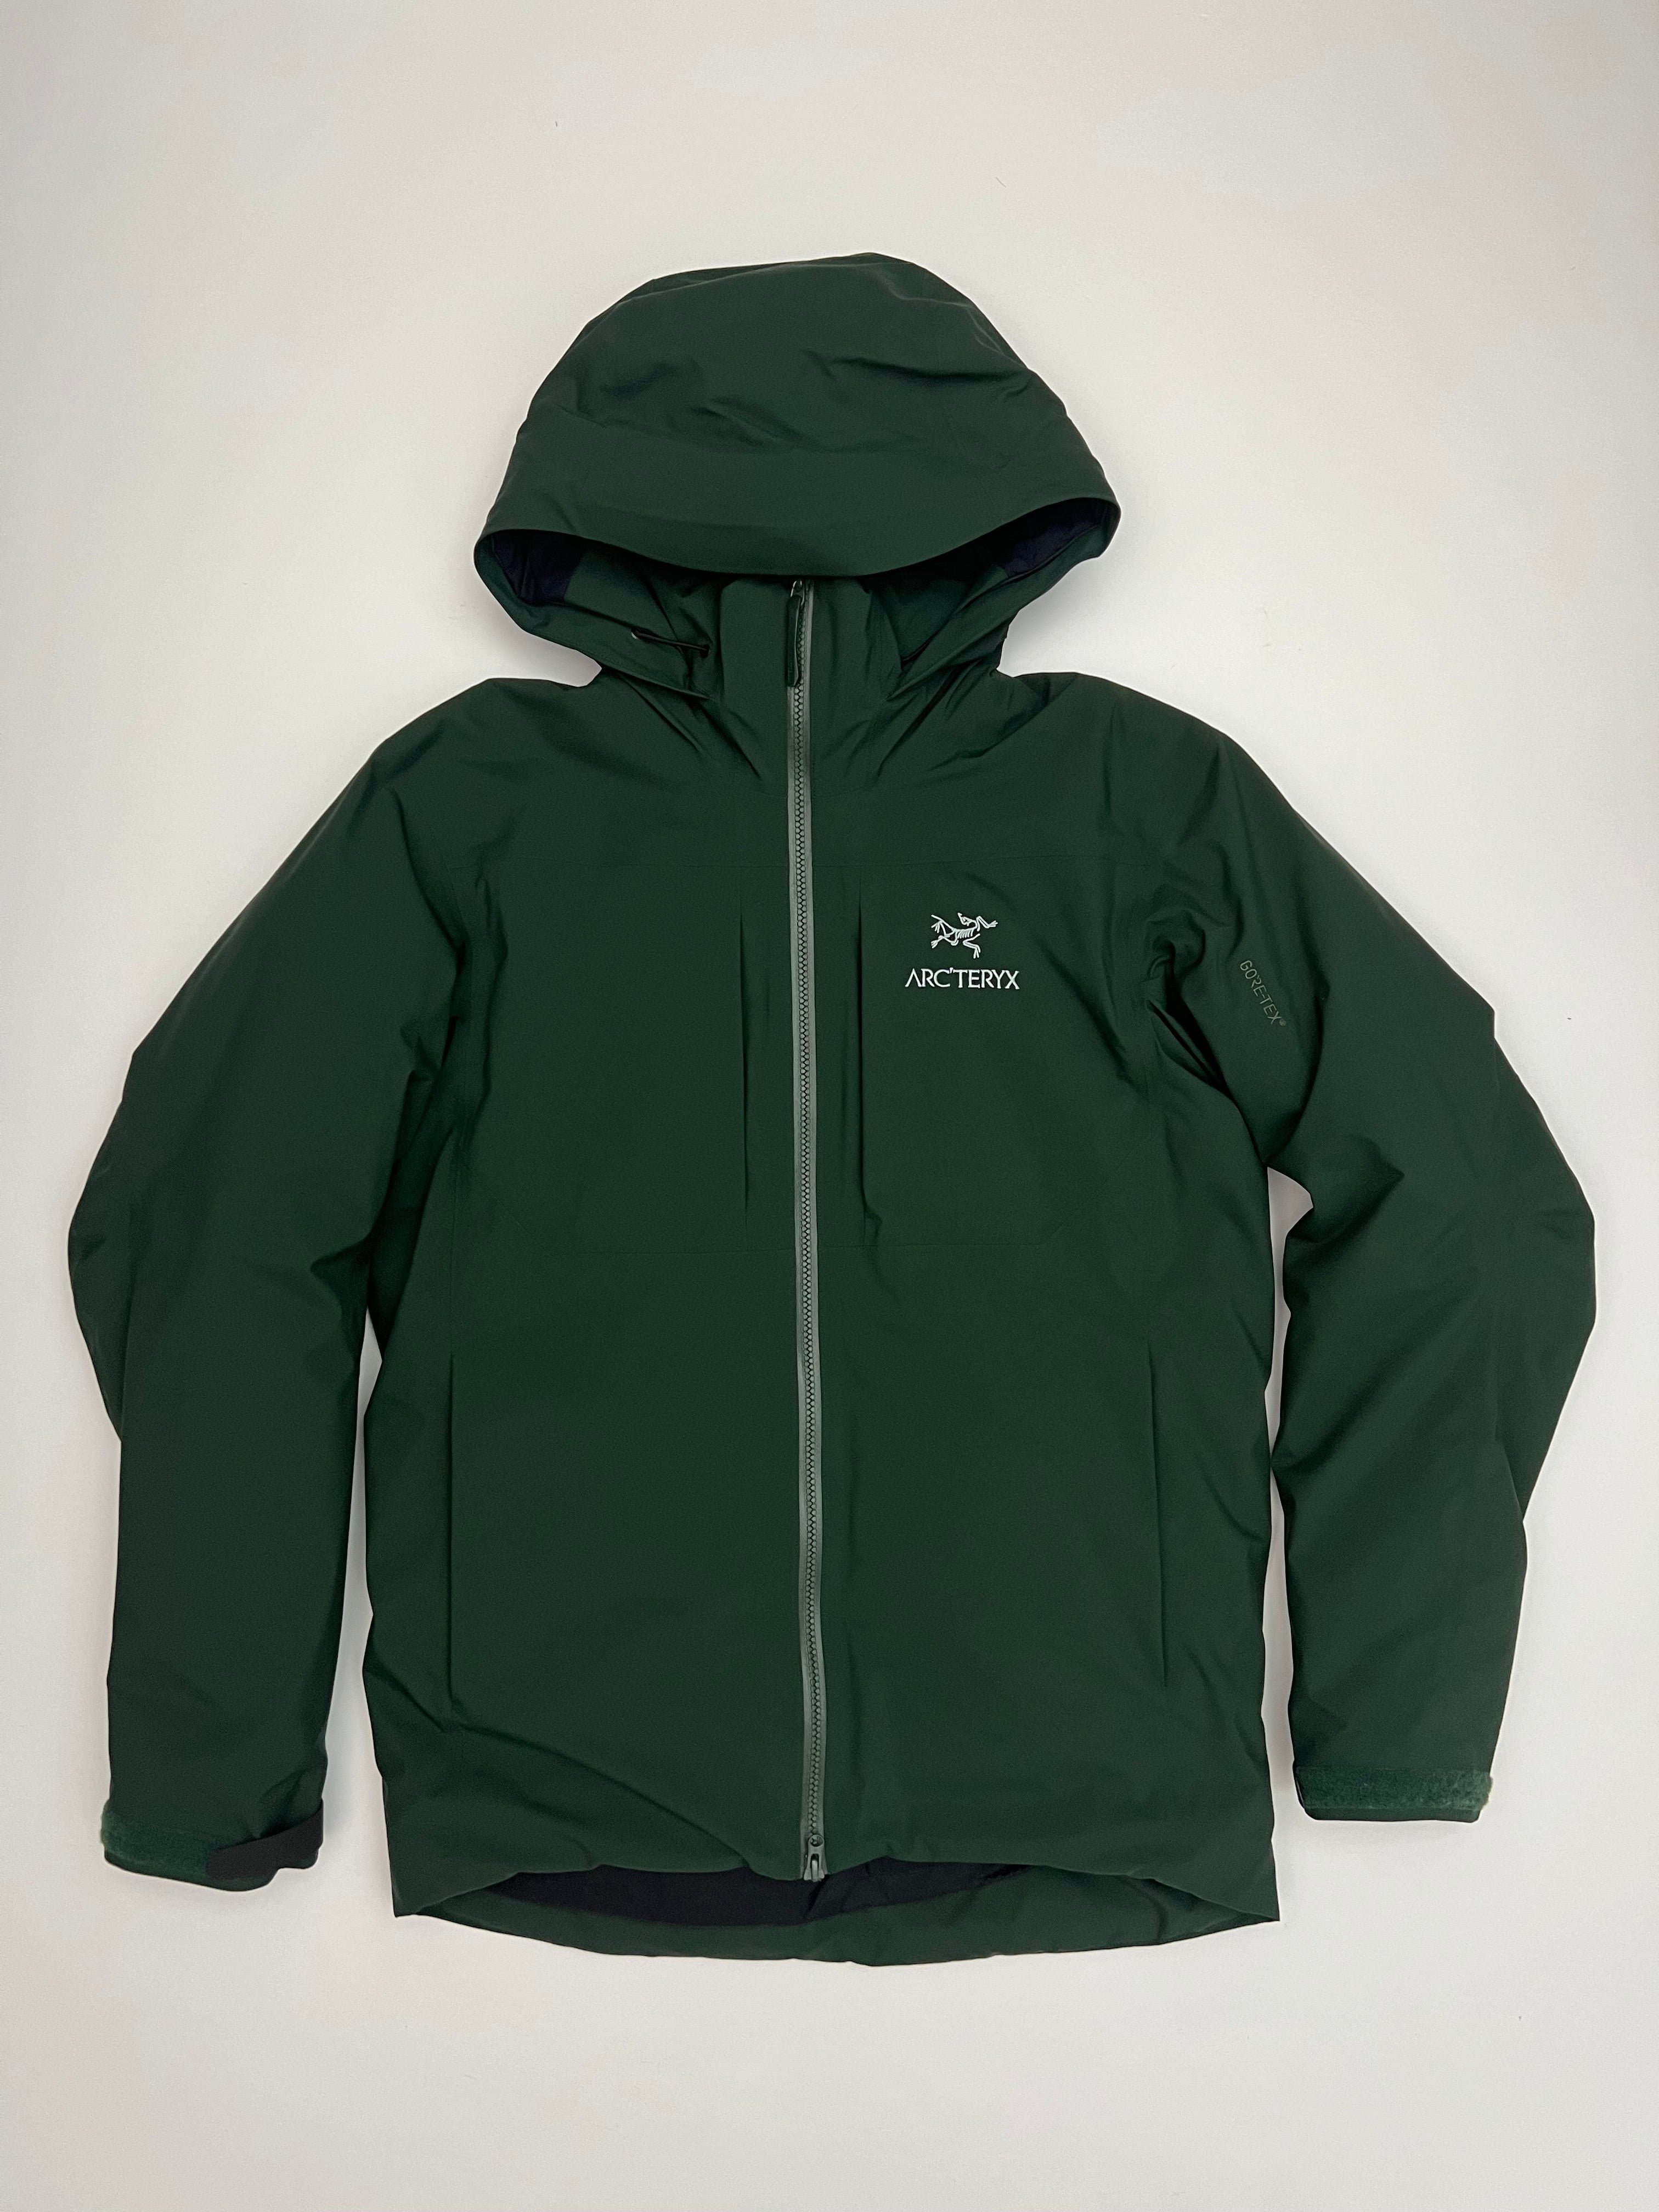 Arc’teryx Fission SV Jacket Conifer Green Men’s S Small Gore-Tex Insulated